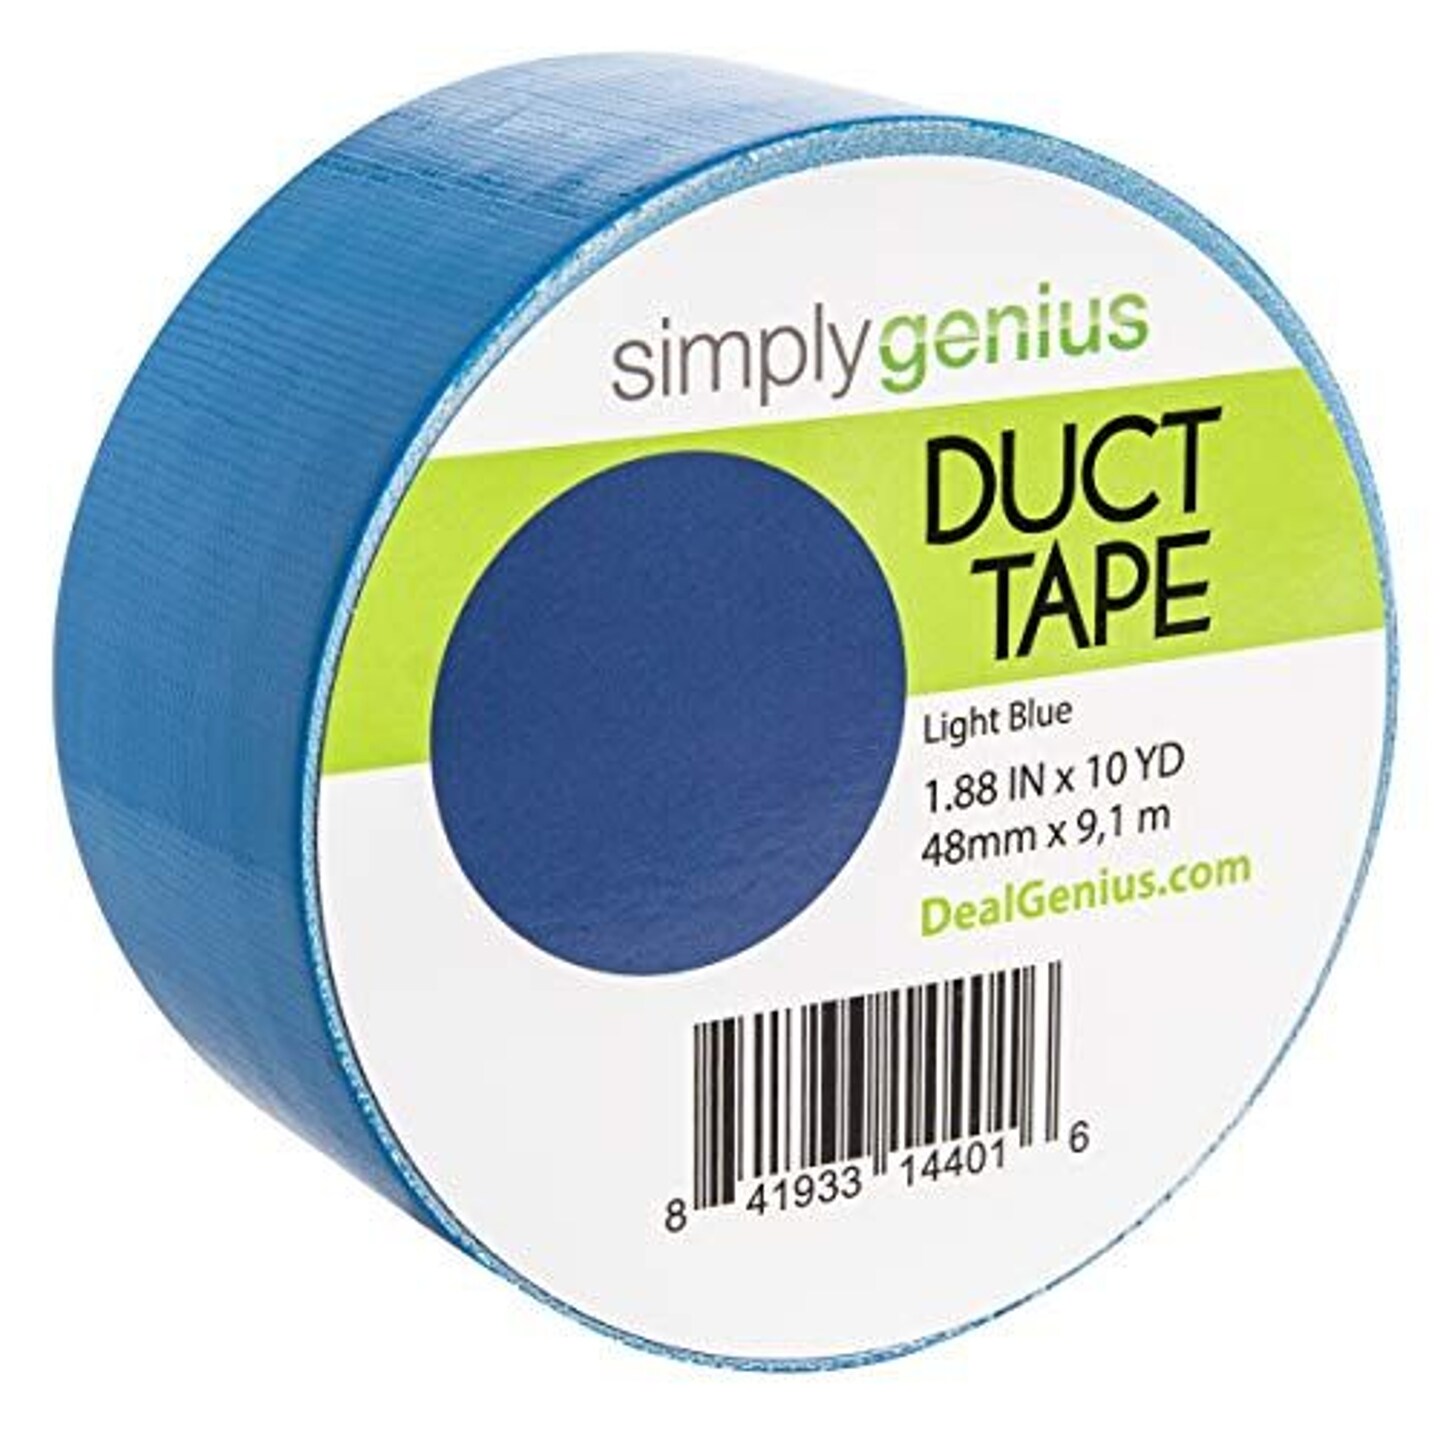 Simply Genius Art &#x26; Craft Duct Tape Heavy Duty - Craft Supplies for Kids &#x26; Adults - Colored Duct Tape - 1.8 in x 10 yards - Colorful Tape for DIY, Craft &#x26; Home Improvement (Light Blue, Single roll)